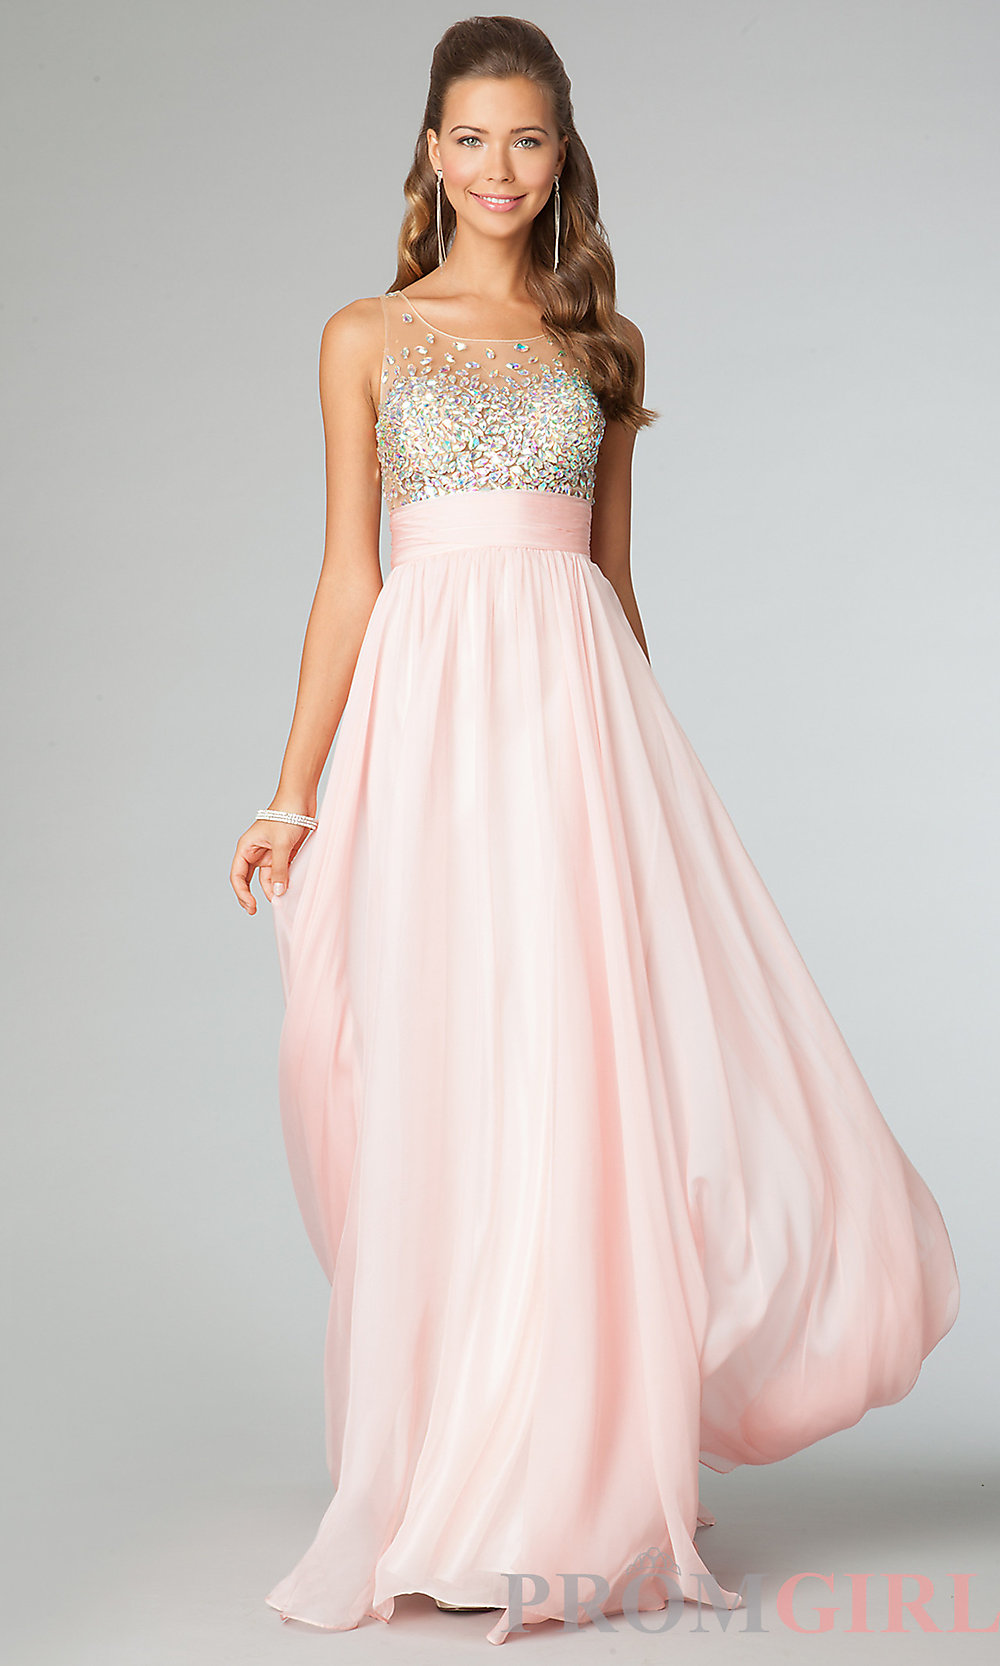 Latest Fancy Gowns, Prom and Cocktail dresses for Weddings and Parties 2014-2015 (4)